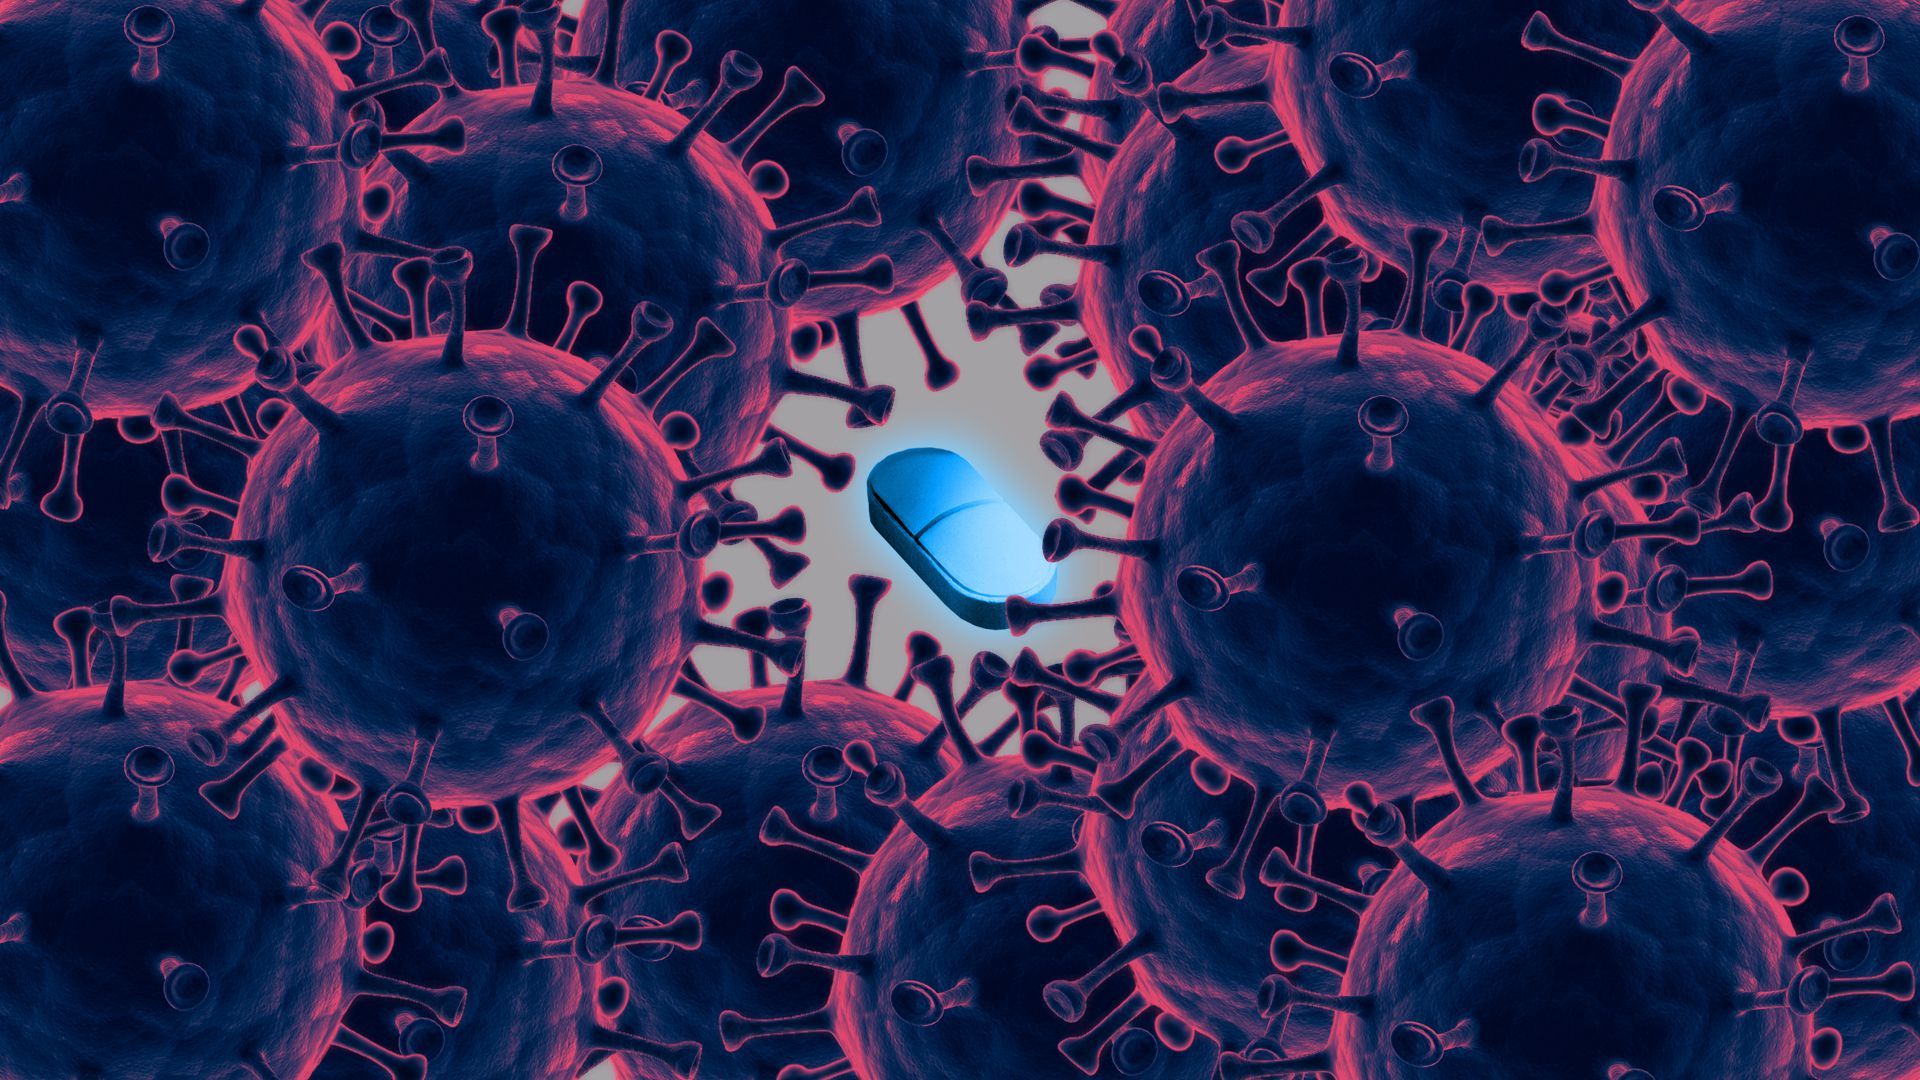 Illustration of a bright blue pill is surrounded by dark coronavirus images